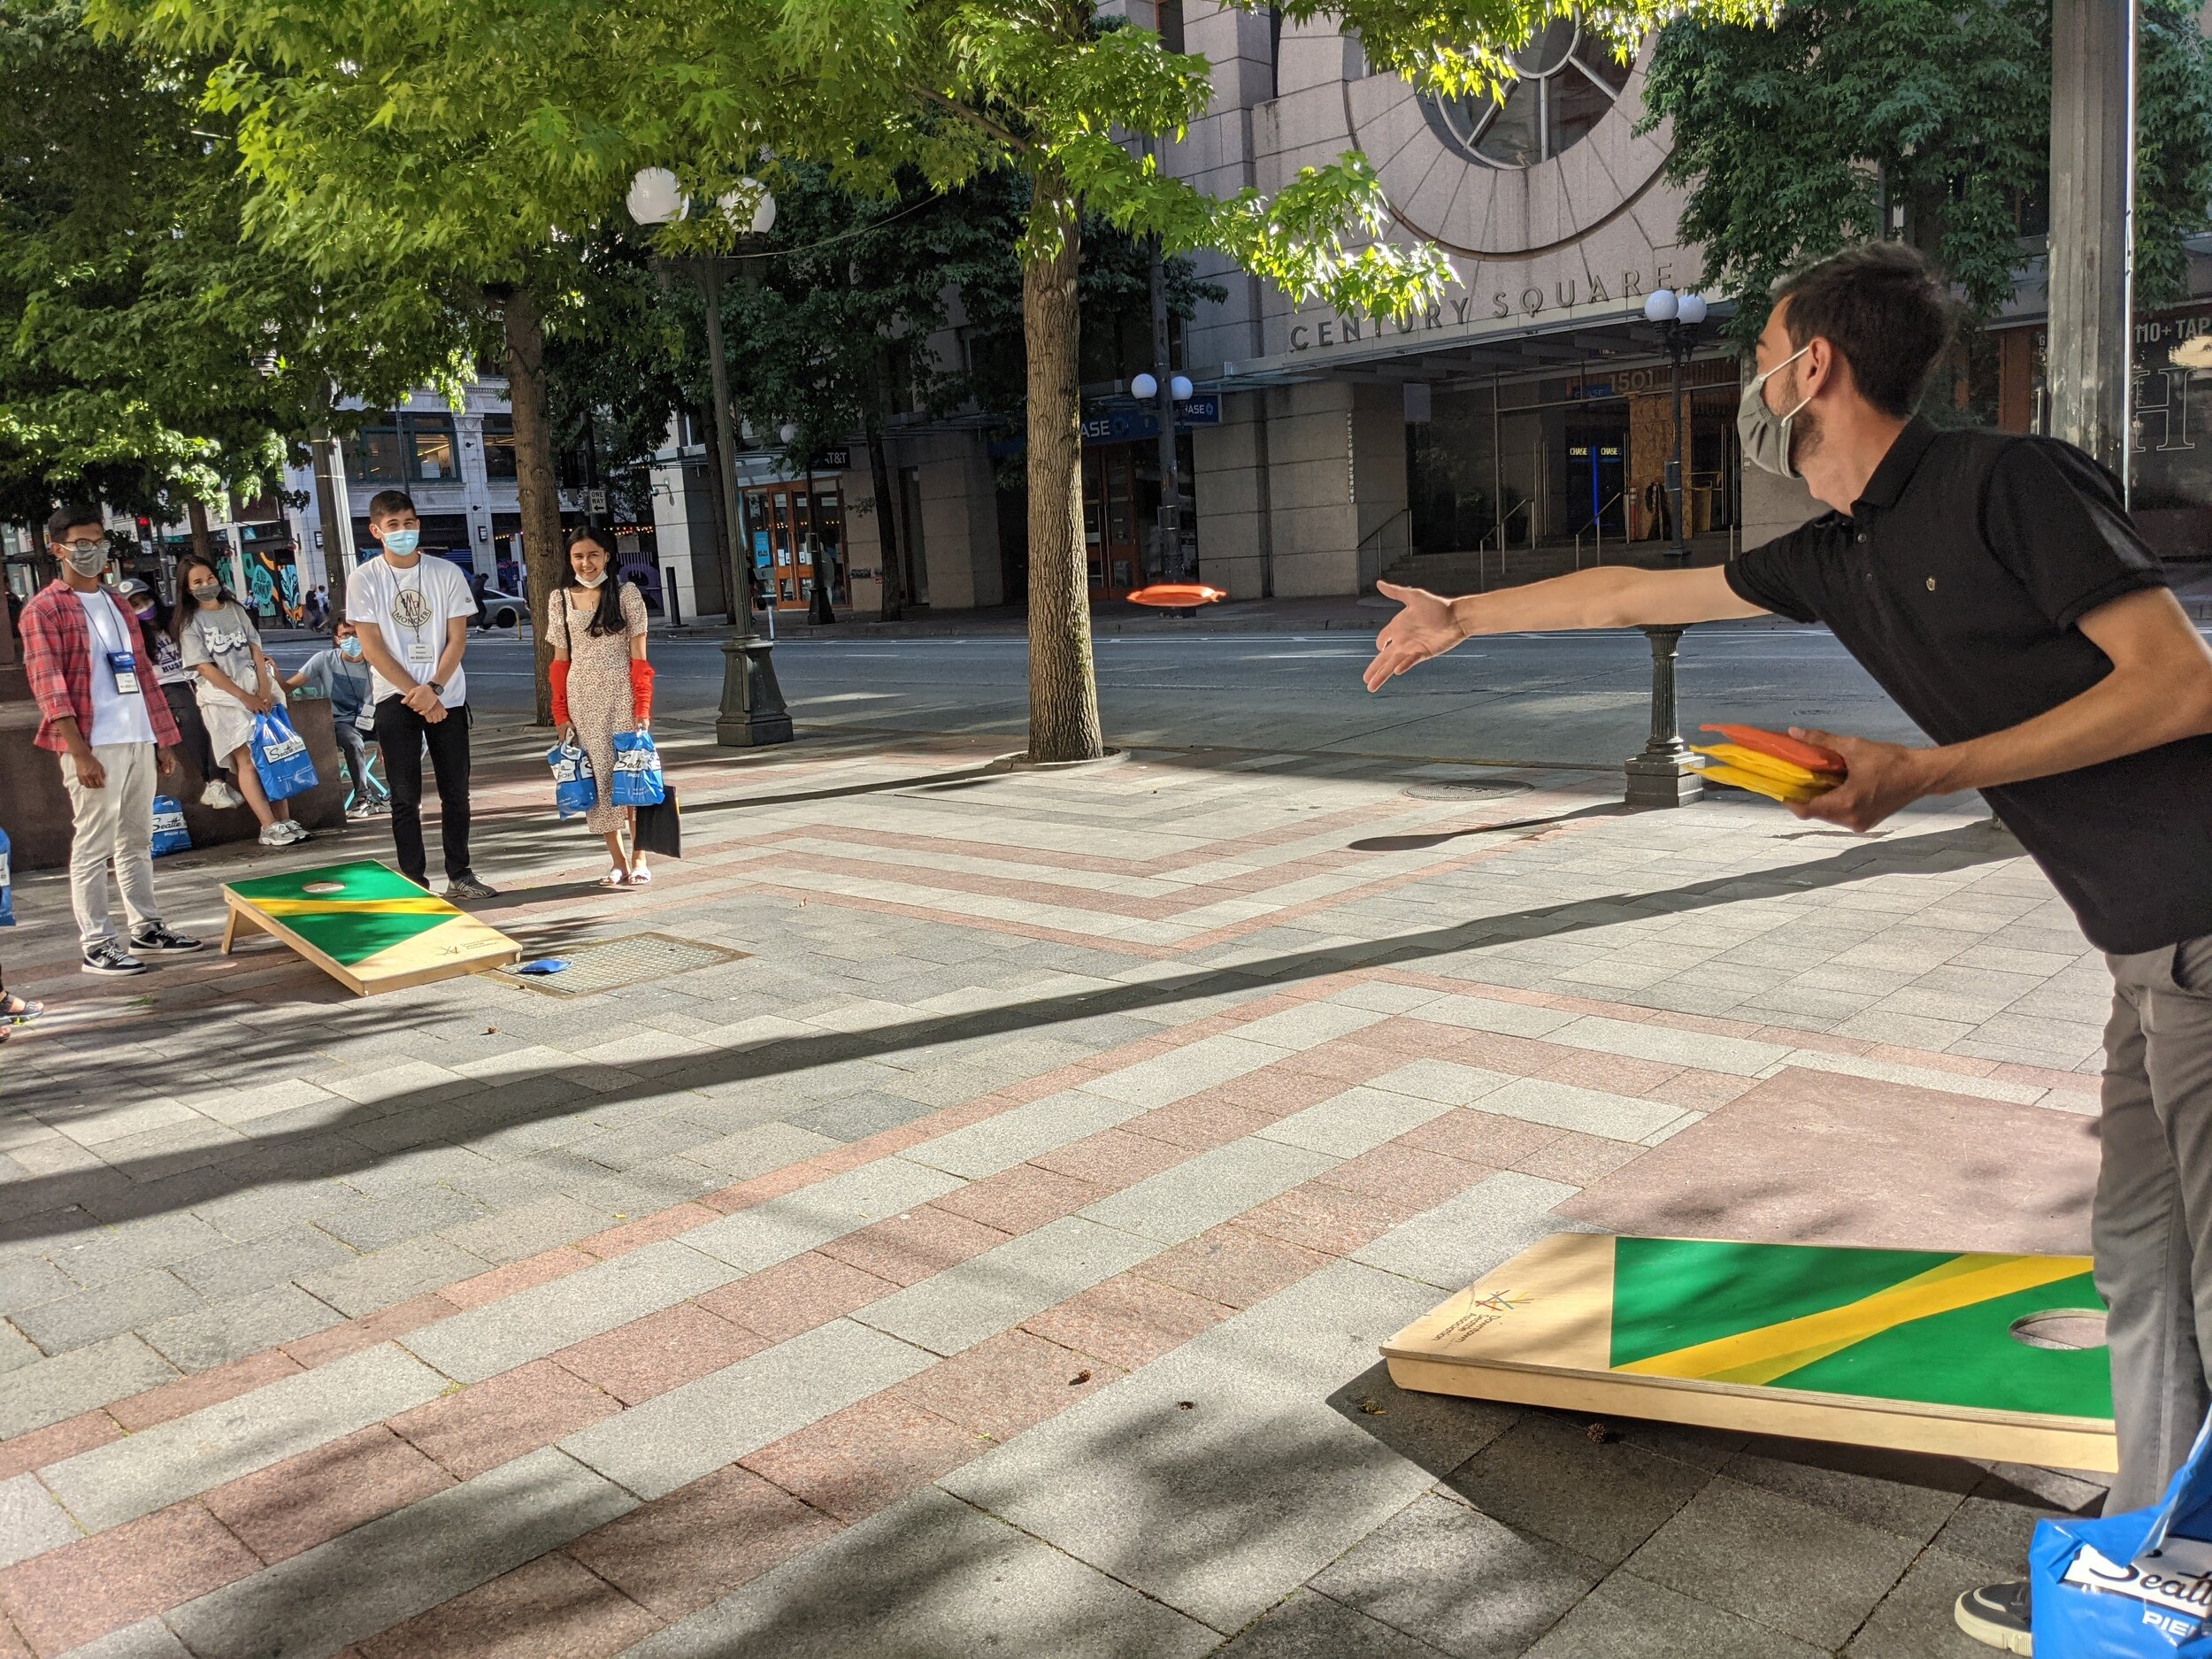 Participants learned to play cornhole in Westlake Park before going to dinner with their University of Washington "Ambassadors"